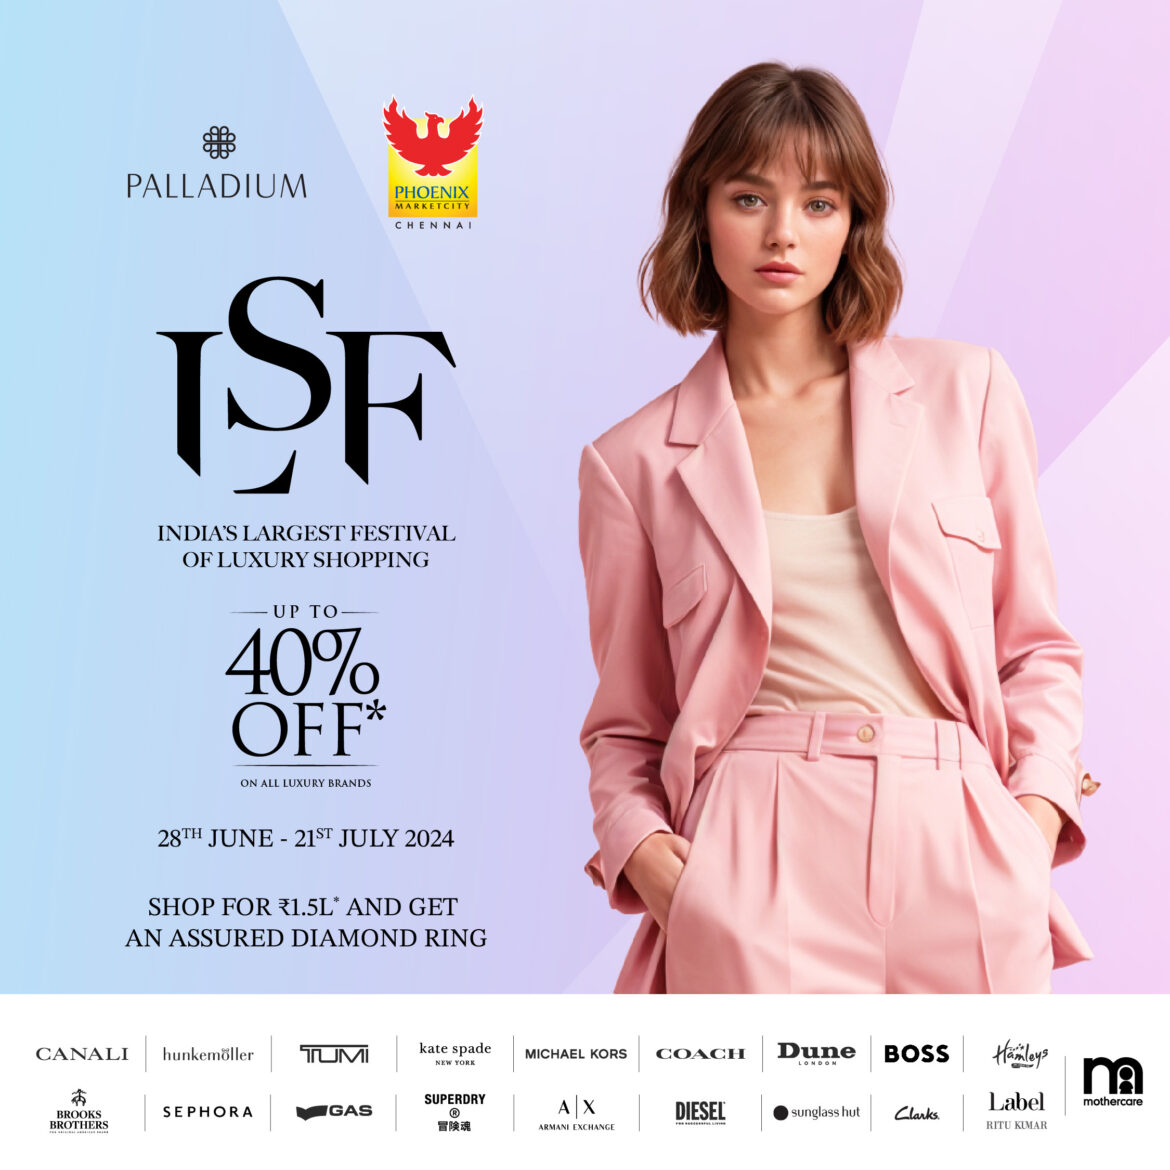 The luxury shopping festival in Palladium will be on till July 21st.